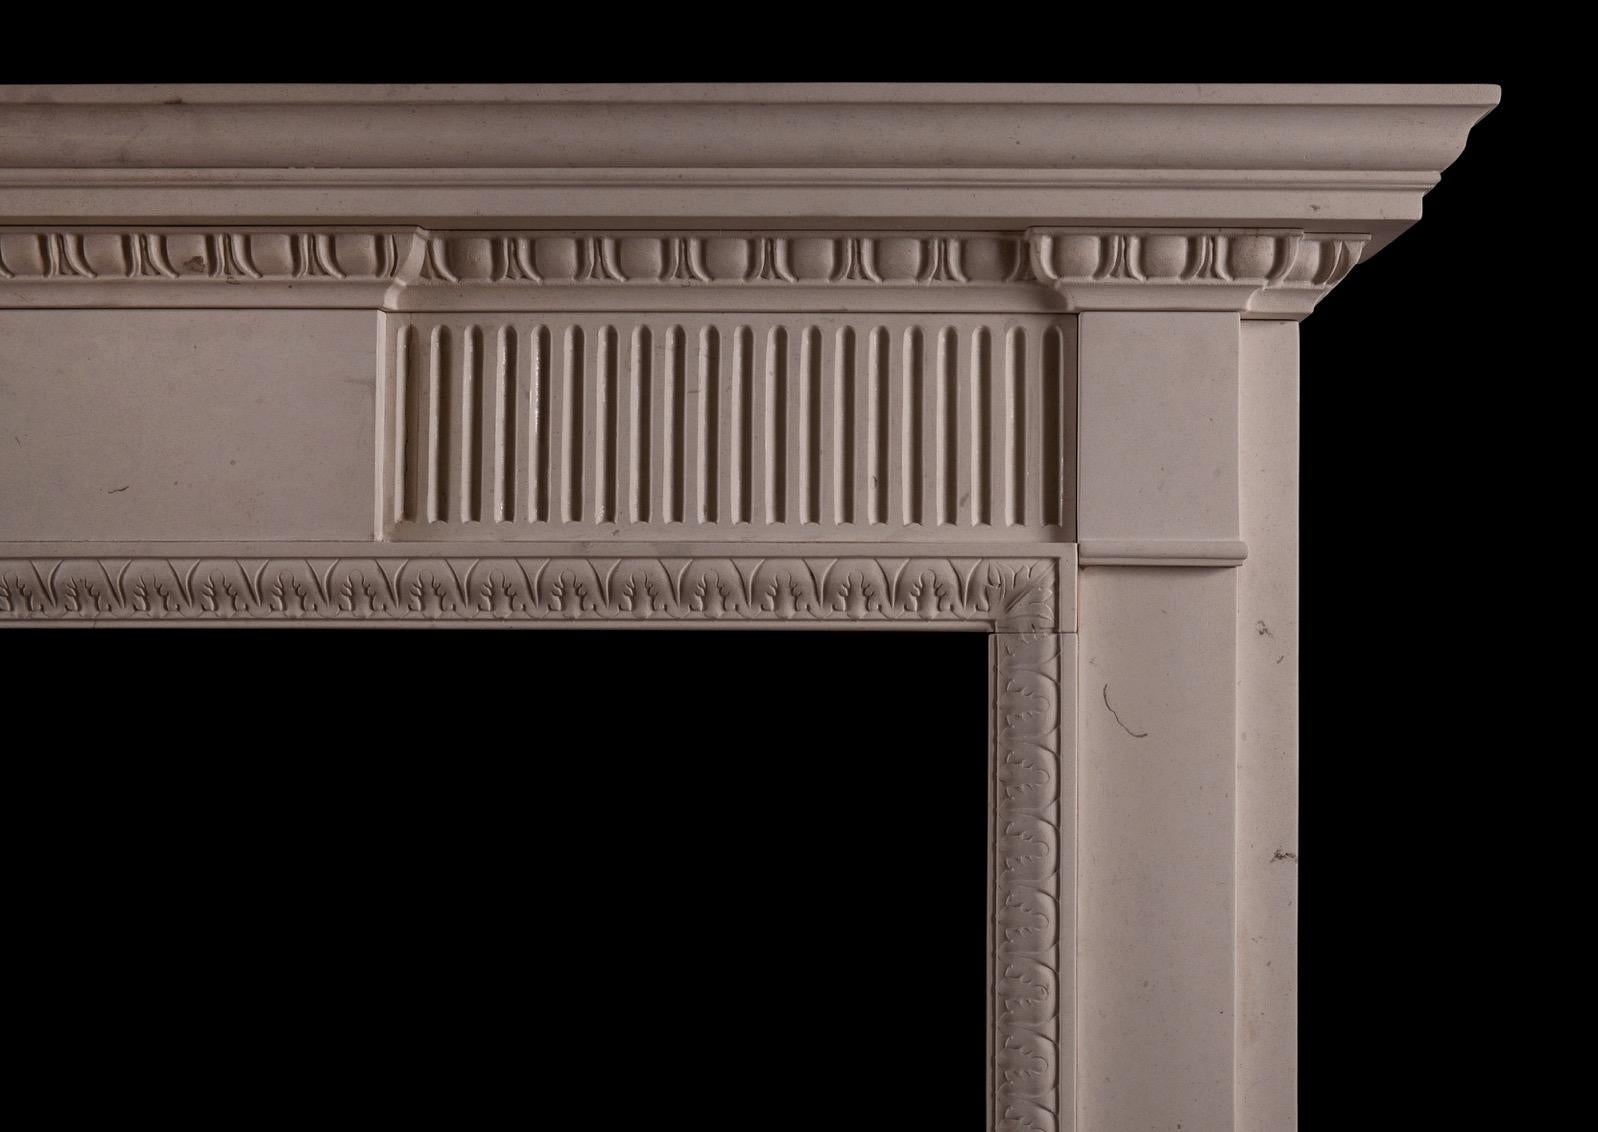 An elegant neoclassical style limestone fireplace, reflecting the designs of the late 18th century. The fluted frieze with plain centre and side blockings. The inner moulding of carved waterleaf, and the moulded shelf with egg and dart bed moulding.